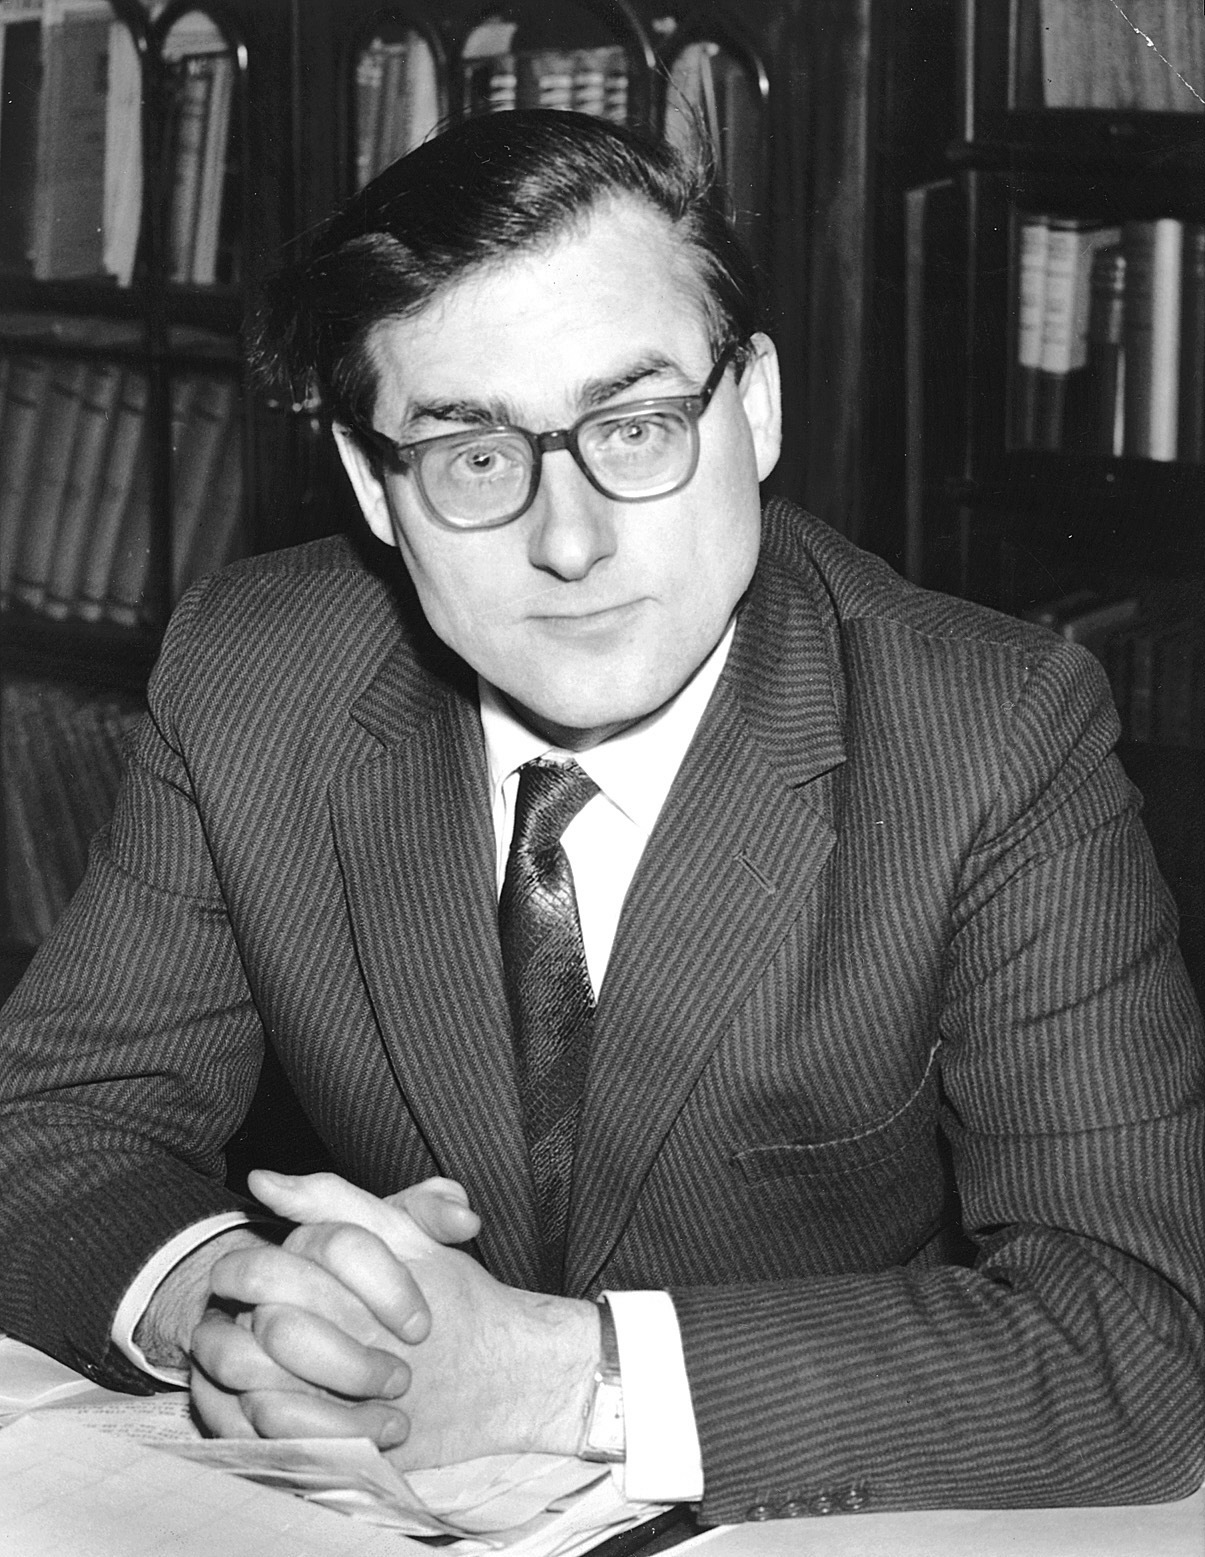 Harold Evans, former editor of The Northern Echo, who grilled the Duke of Edinburgh on his first TV interview